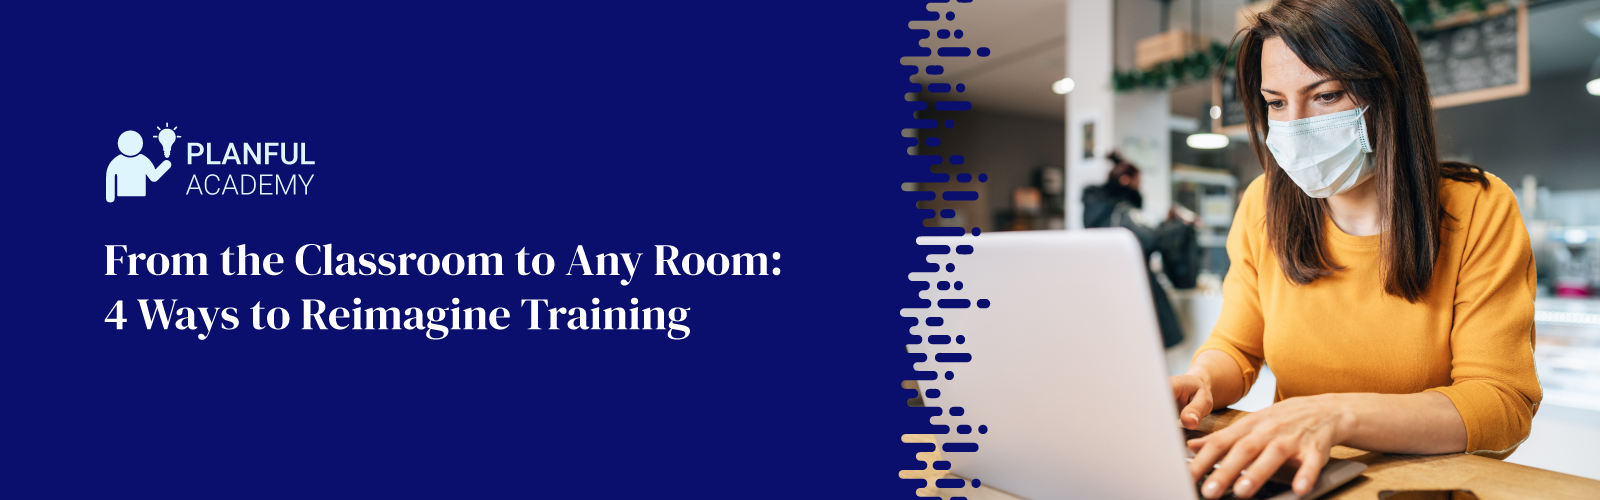 From the Classroom to Any Room: 4 Ways to Reimagine Training